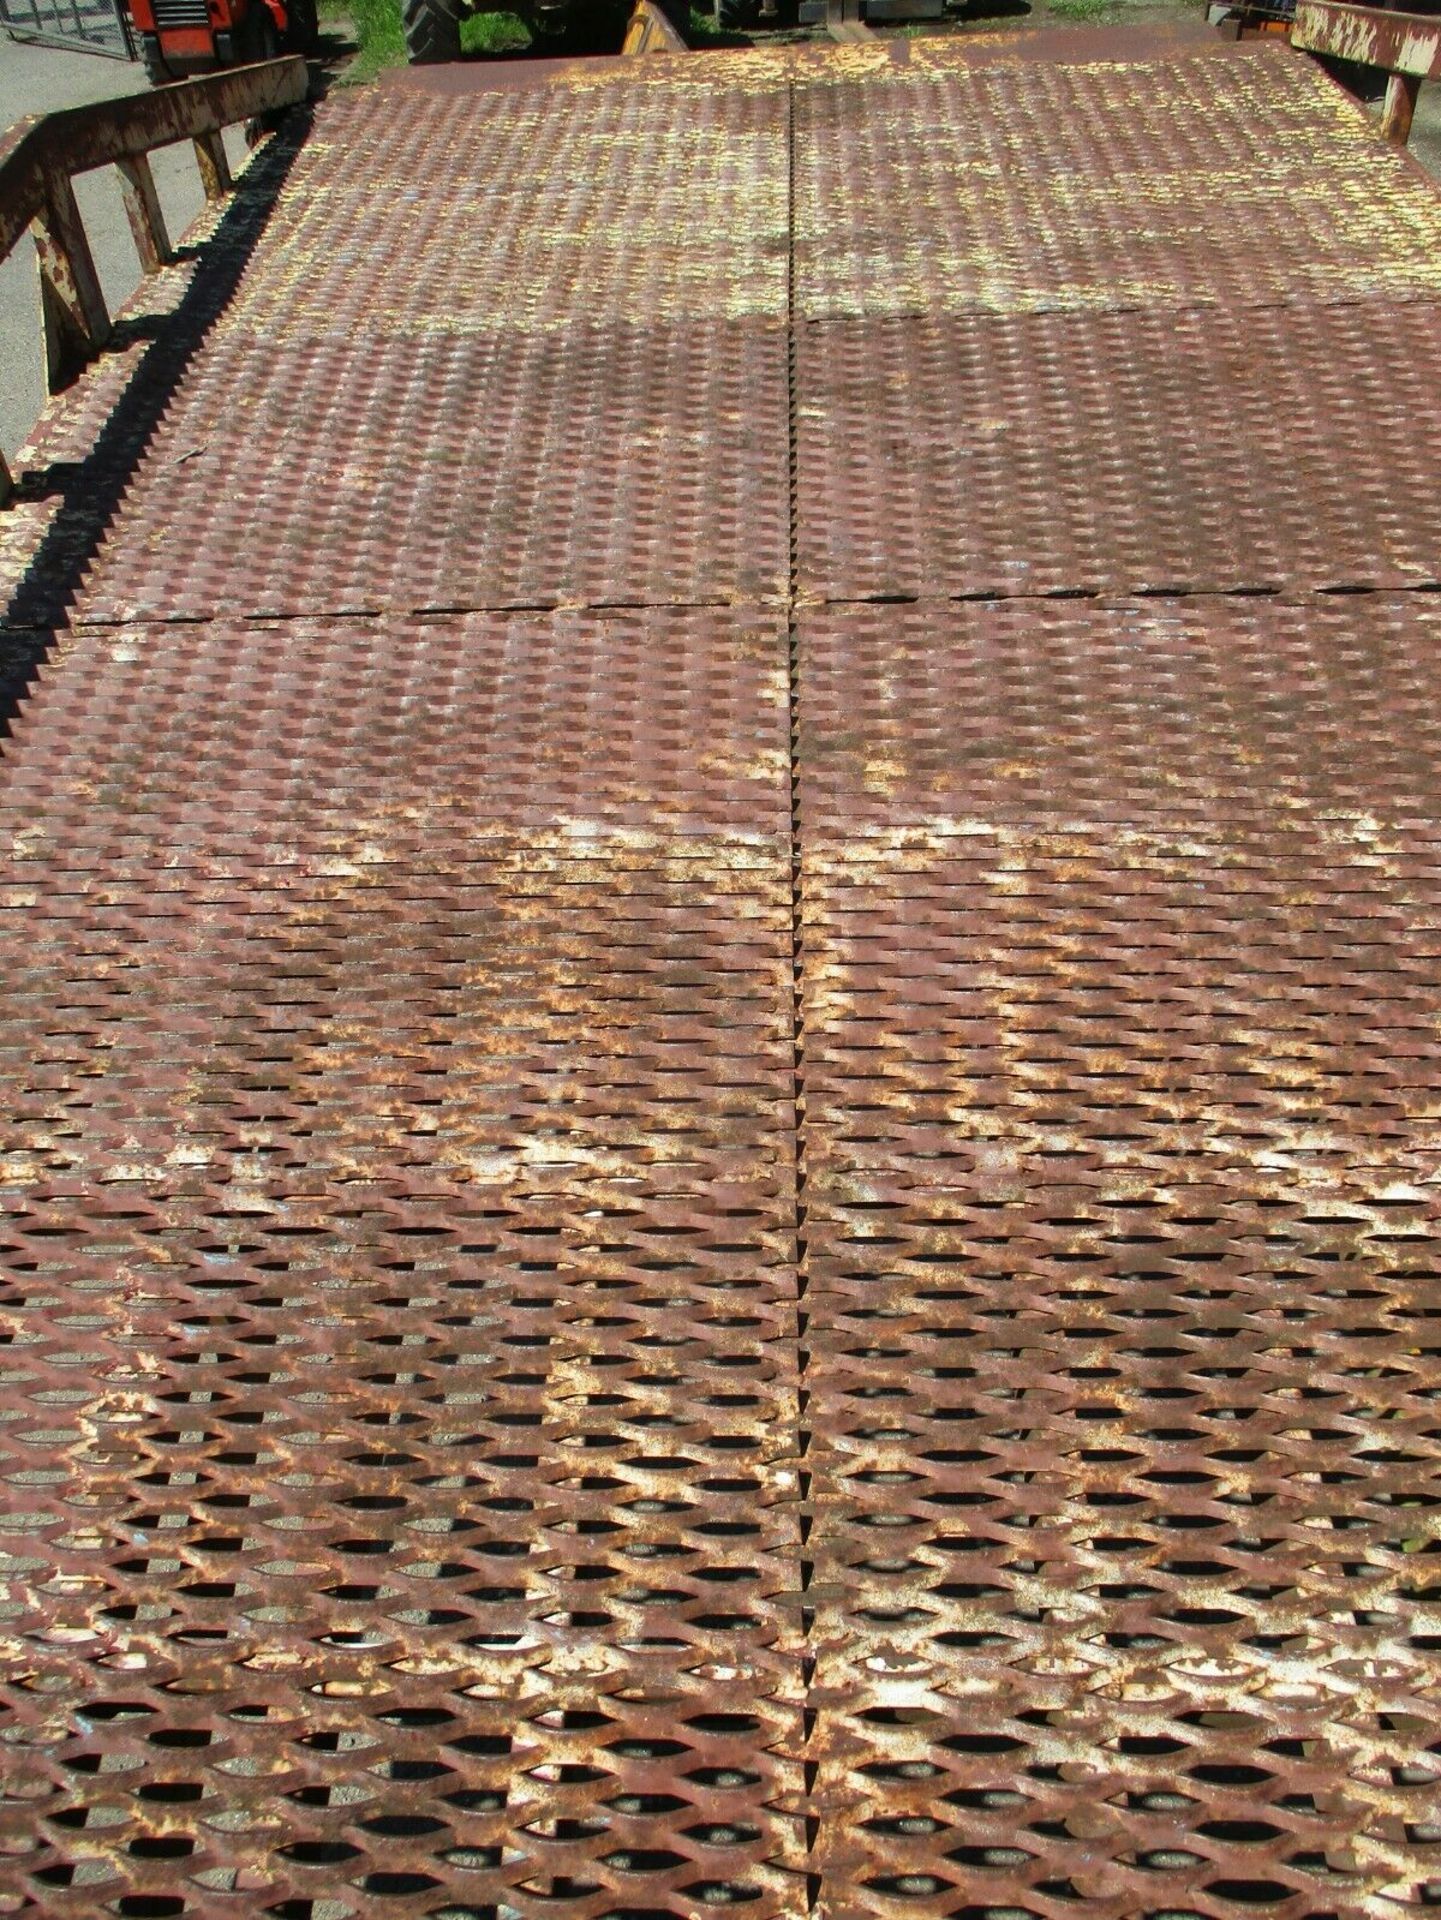 Container loading ramp - Image 6 of 10